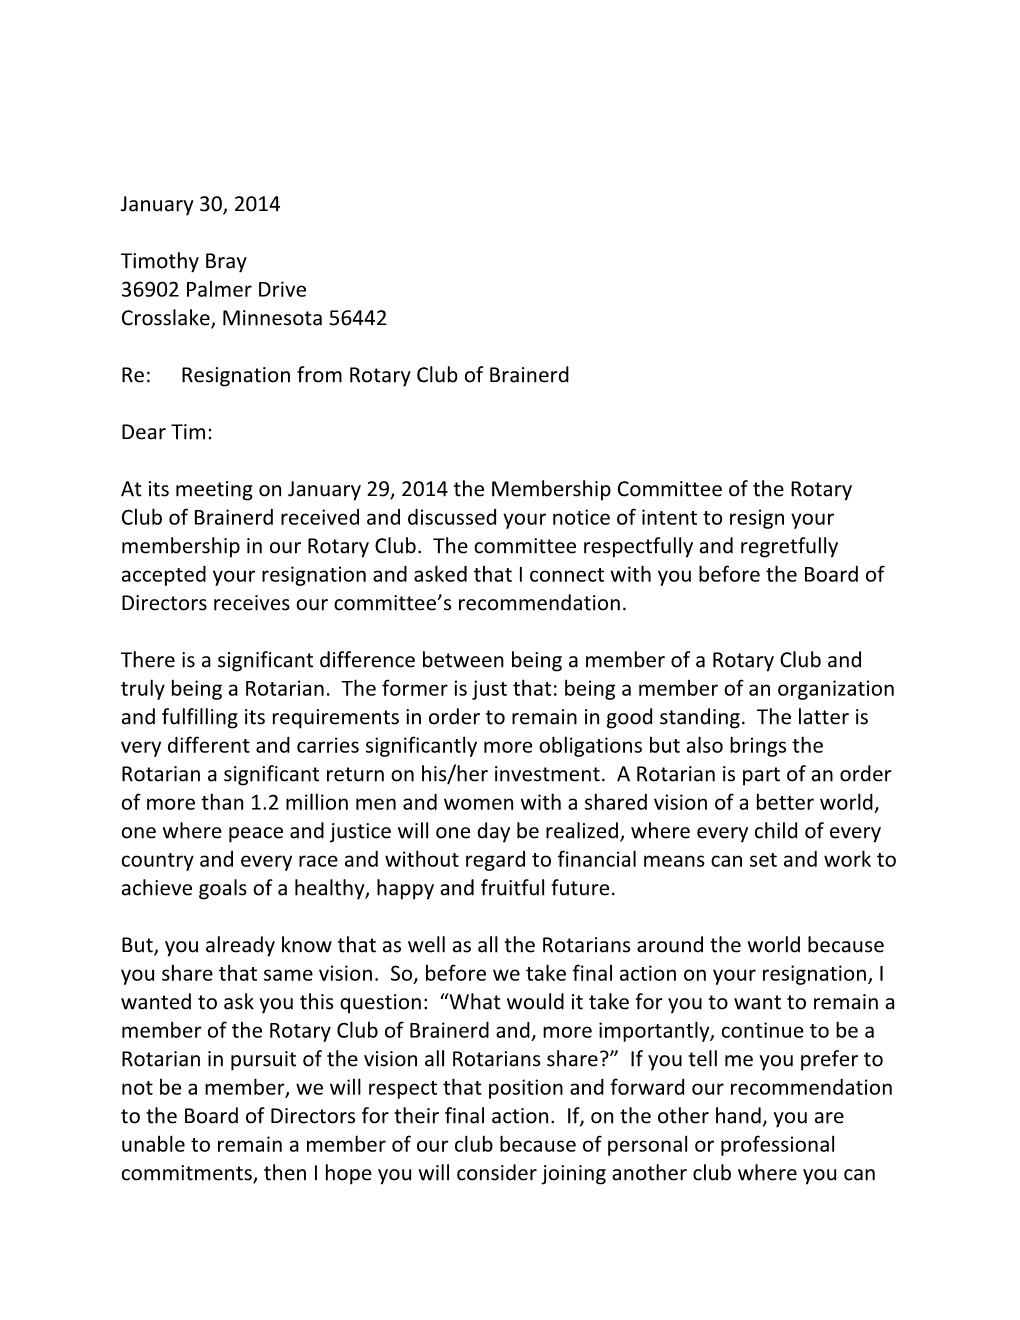 Re: Resignation from Rotary Club of Brainerd